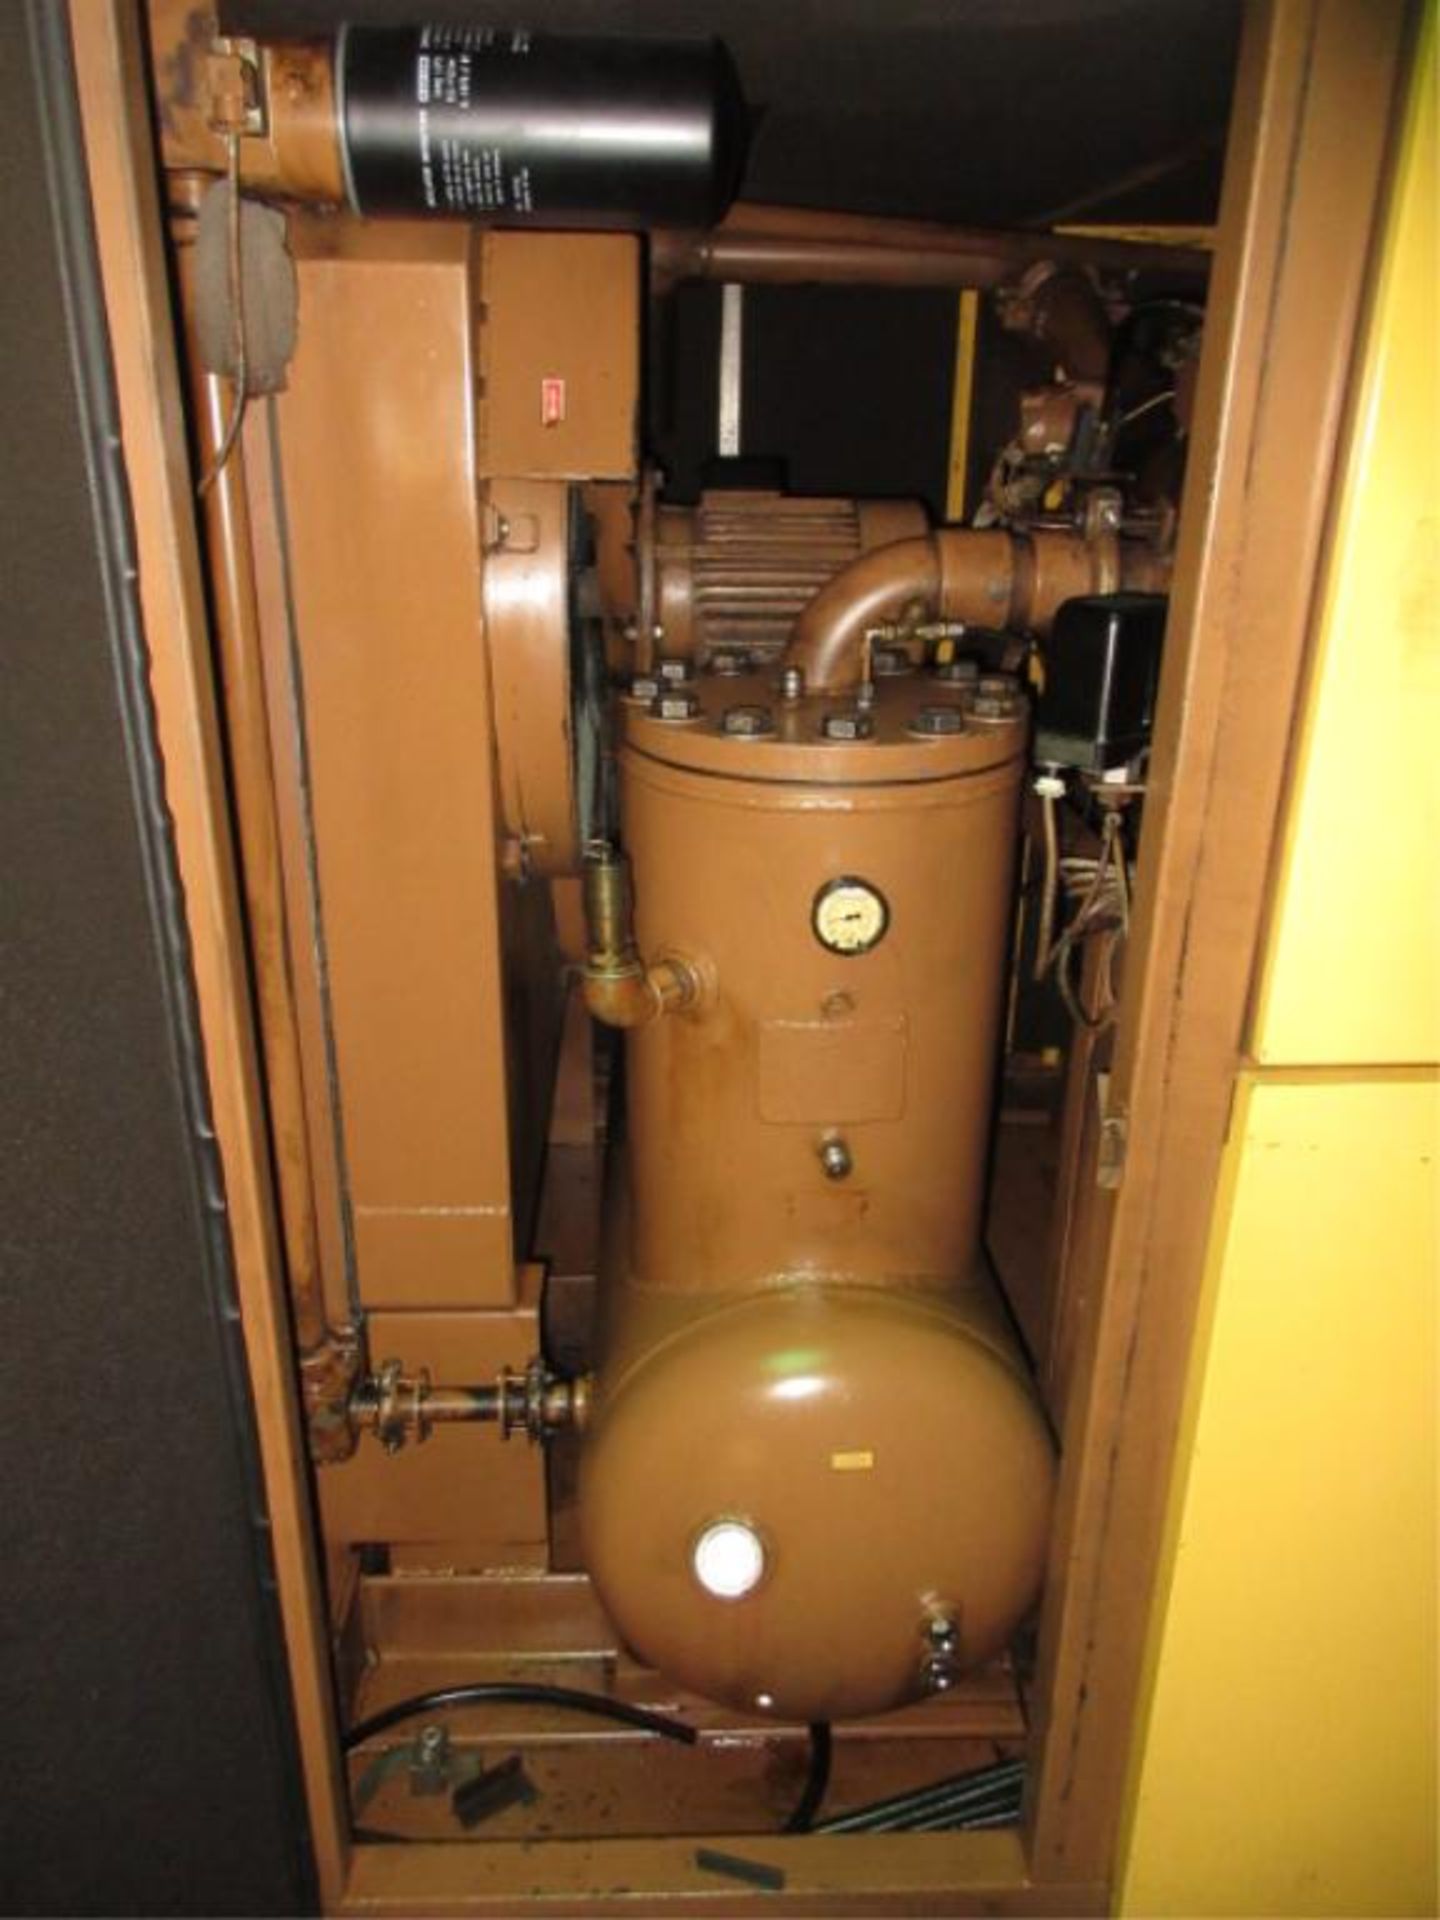 Kaeser ES 300 Sigma Profile Rotary Screw Air Compressor, (1987), 160 KW motor, service/load hrs. - Image 8 of 8